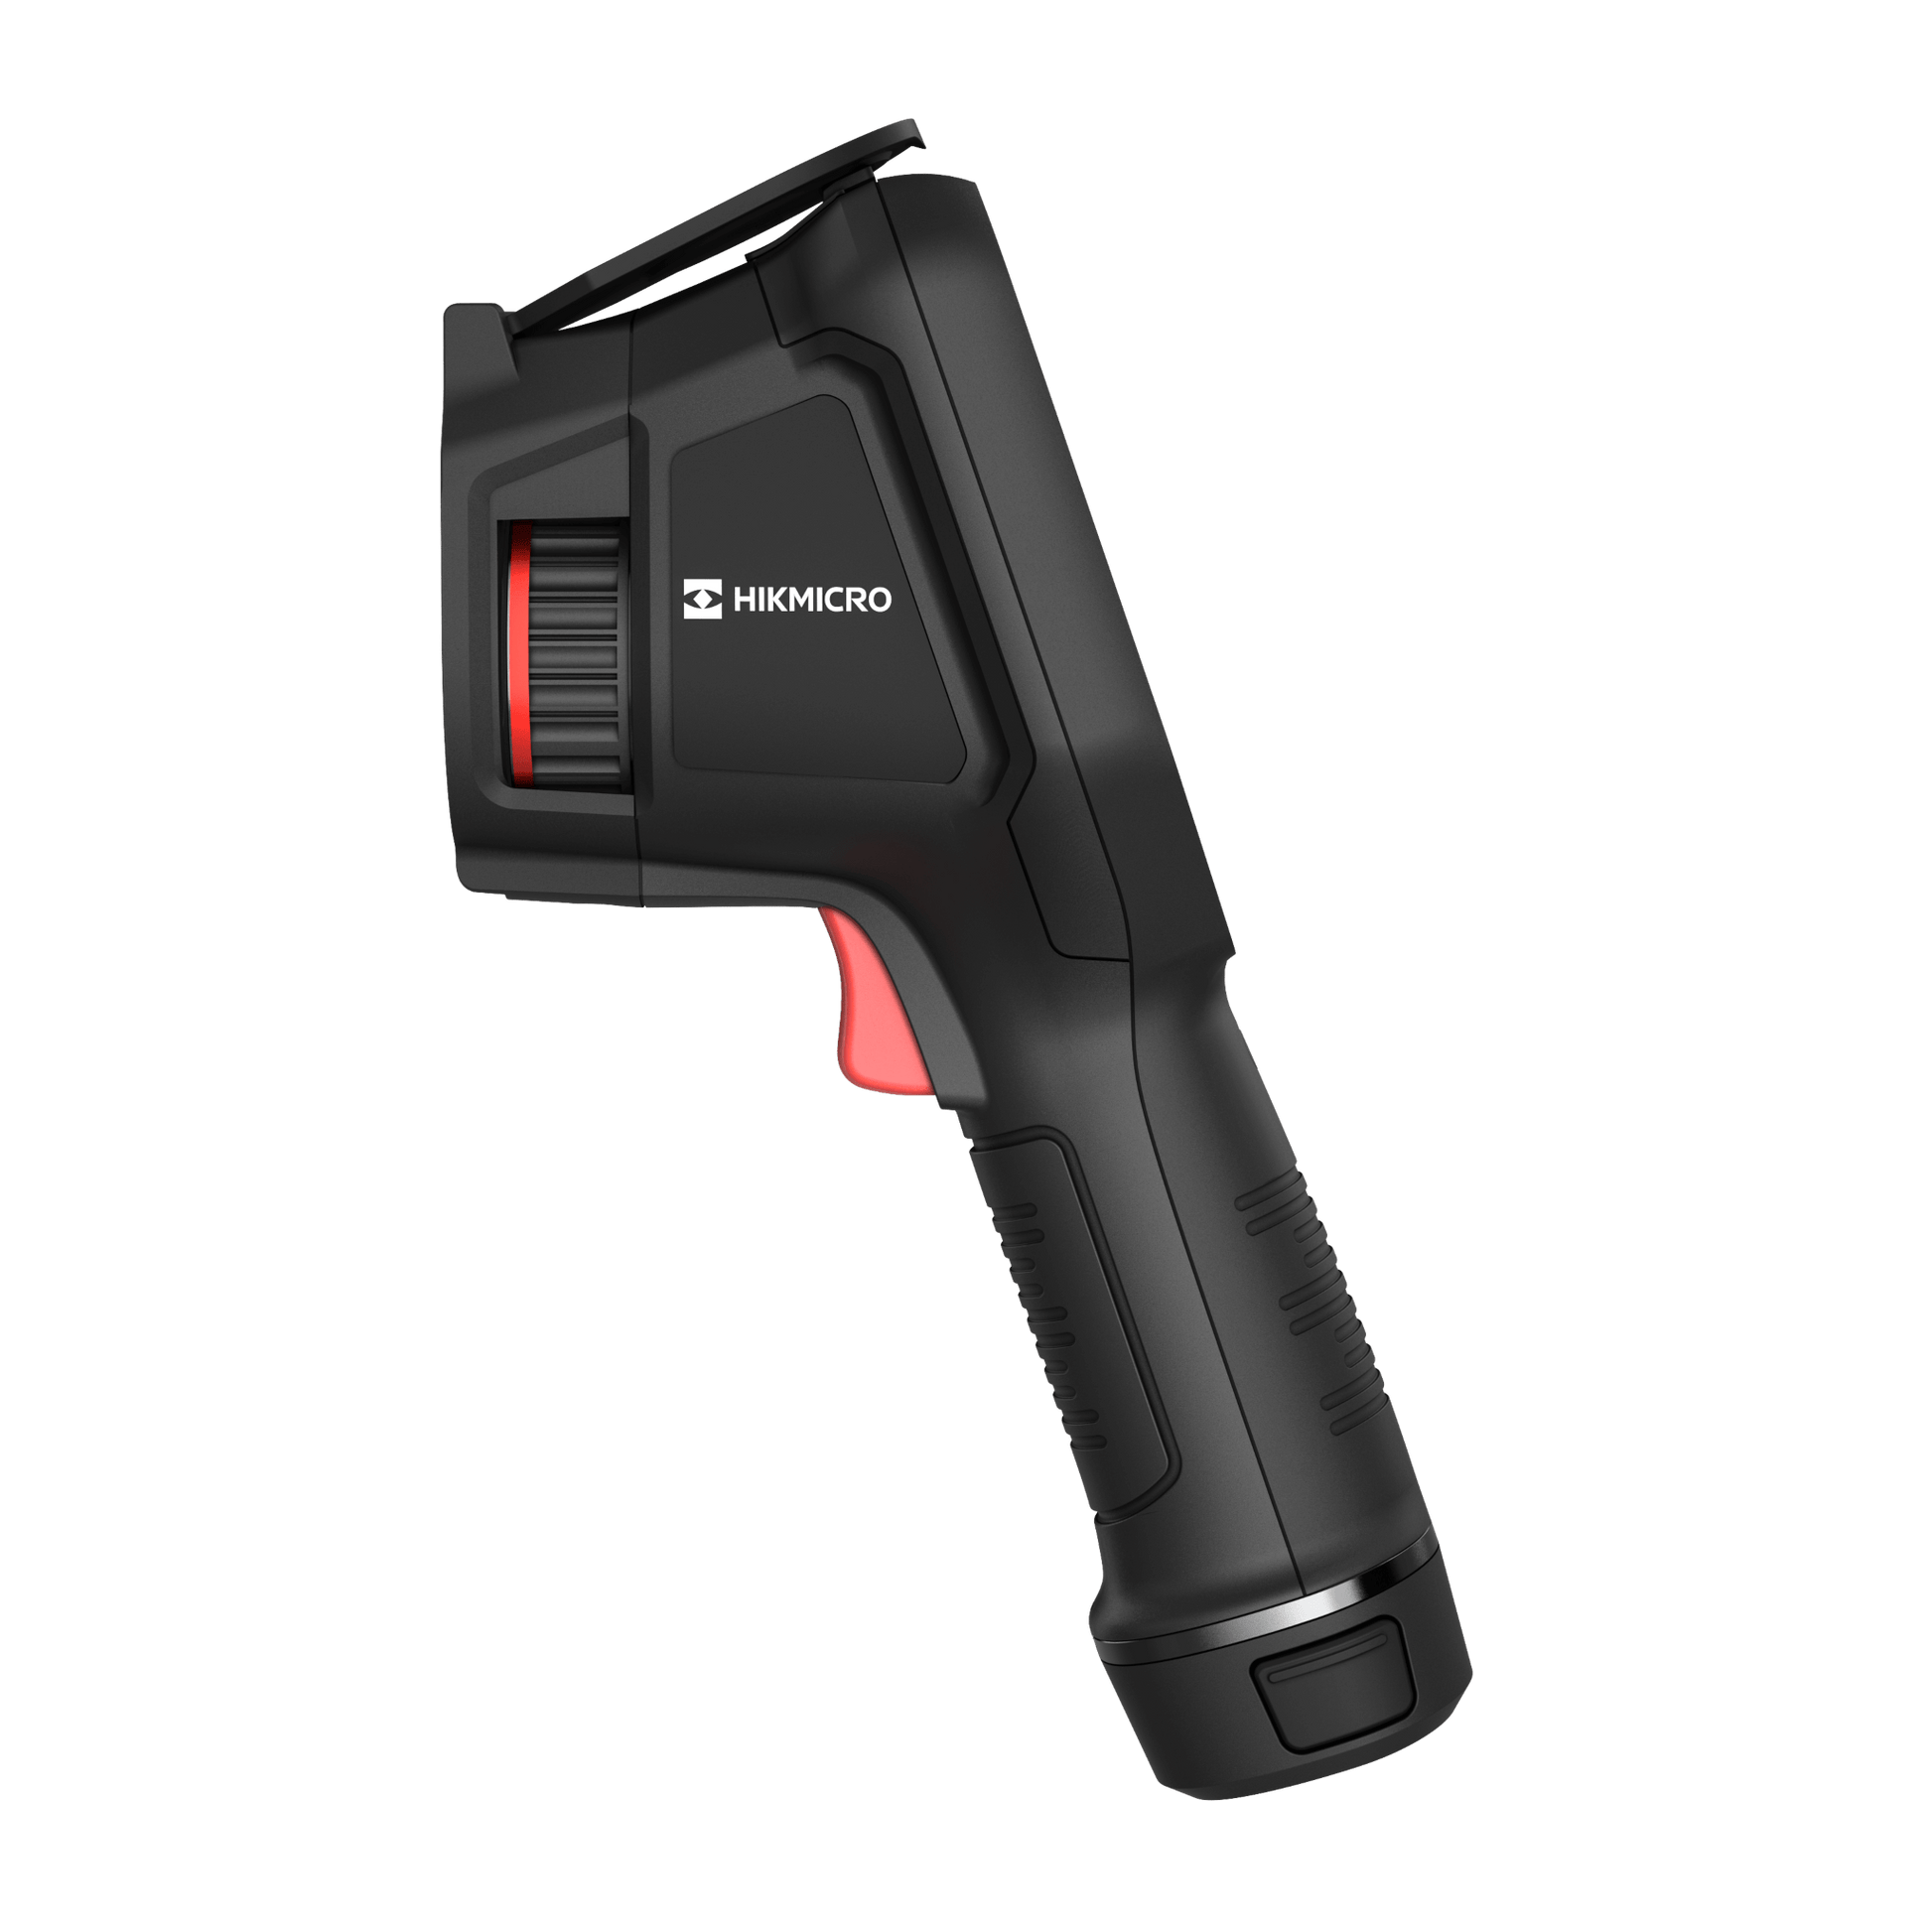 HikMicro M11 Handheld Thermography Camera side view on a transparent background